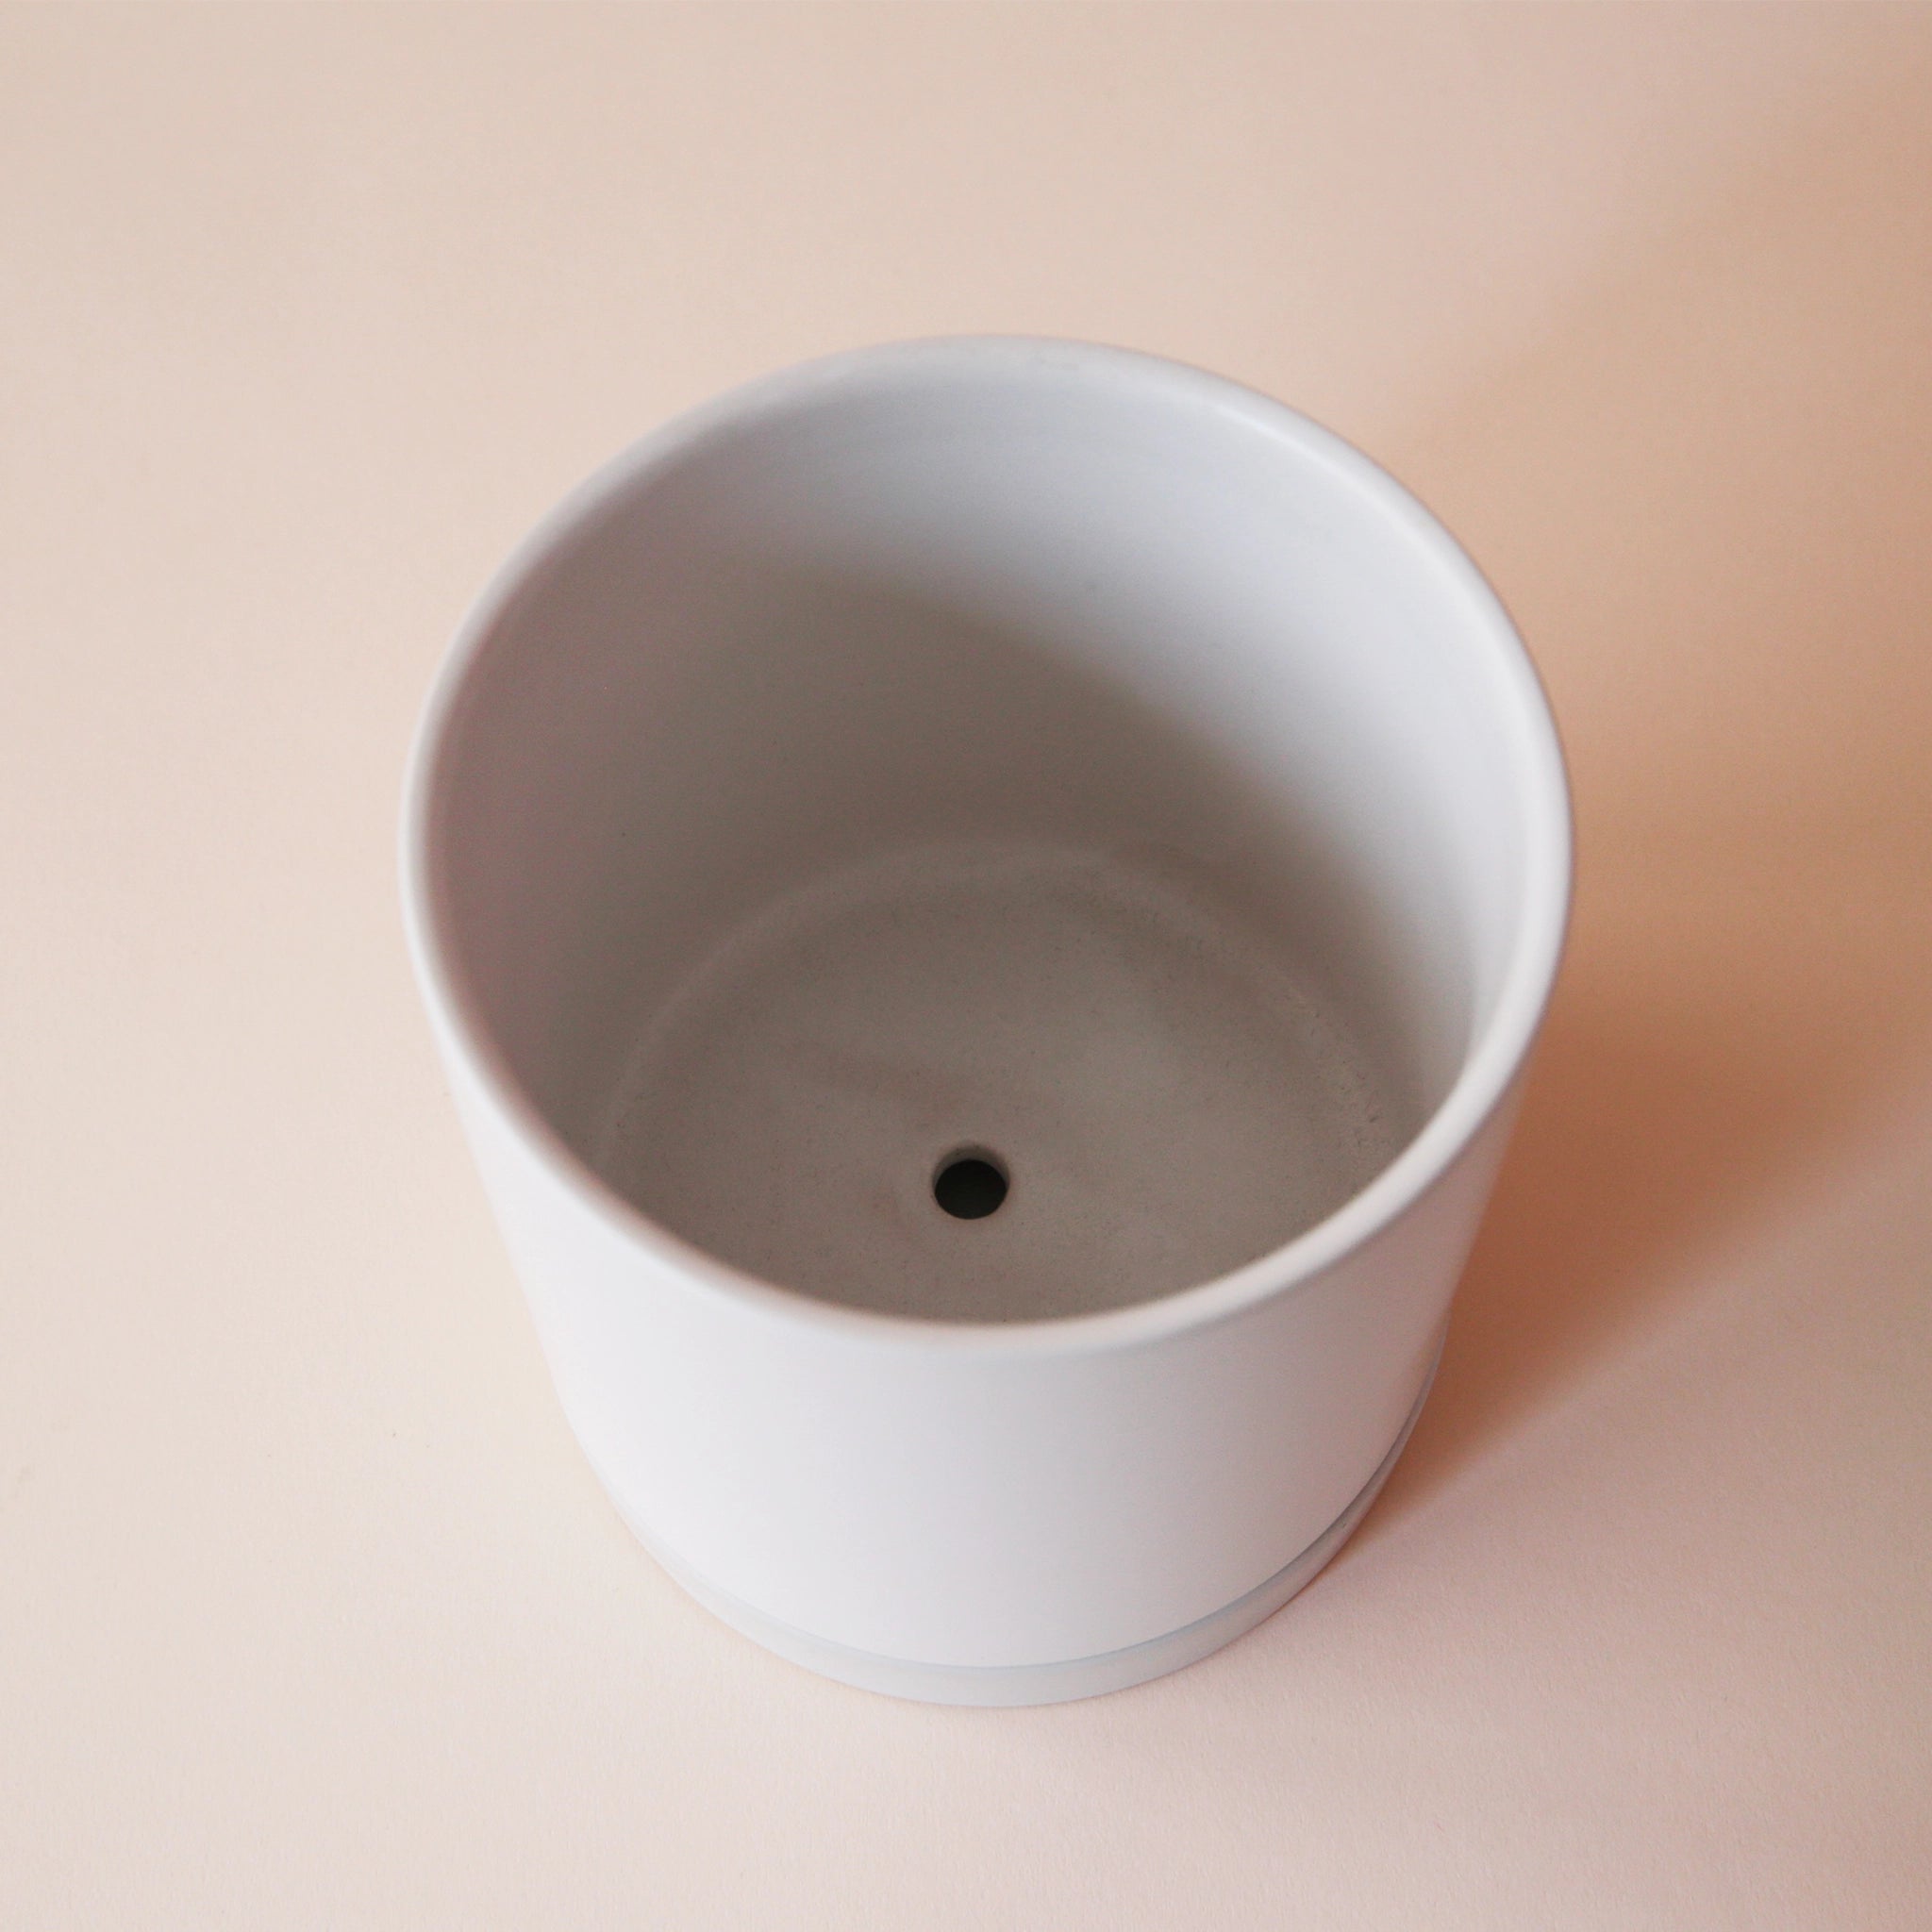 interior view of a simple white pot with drainage hole